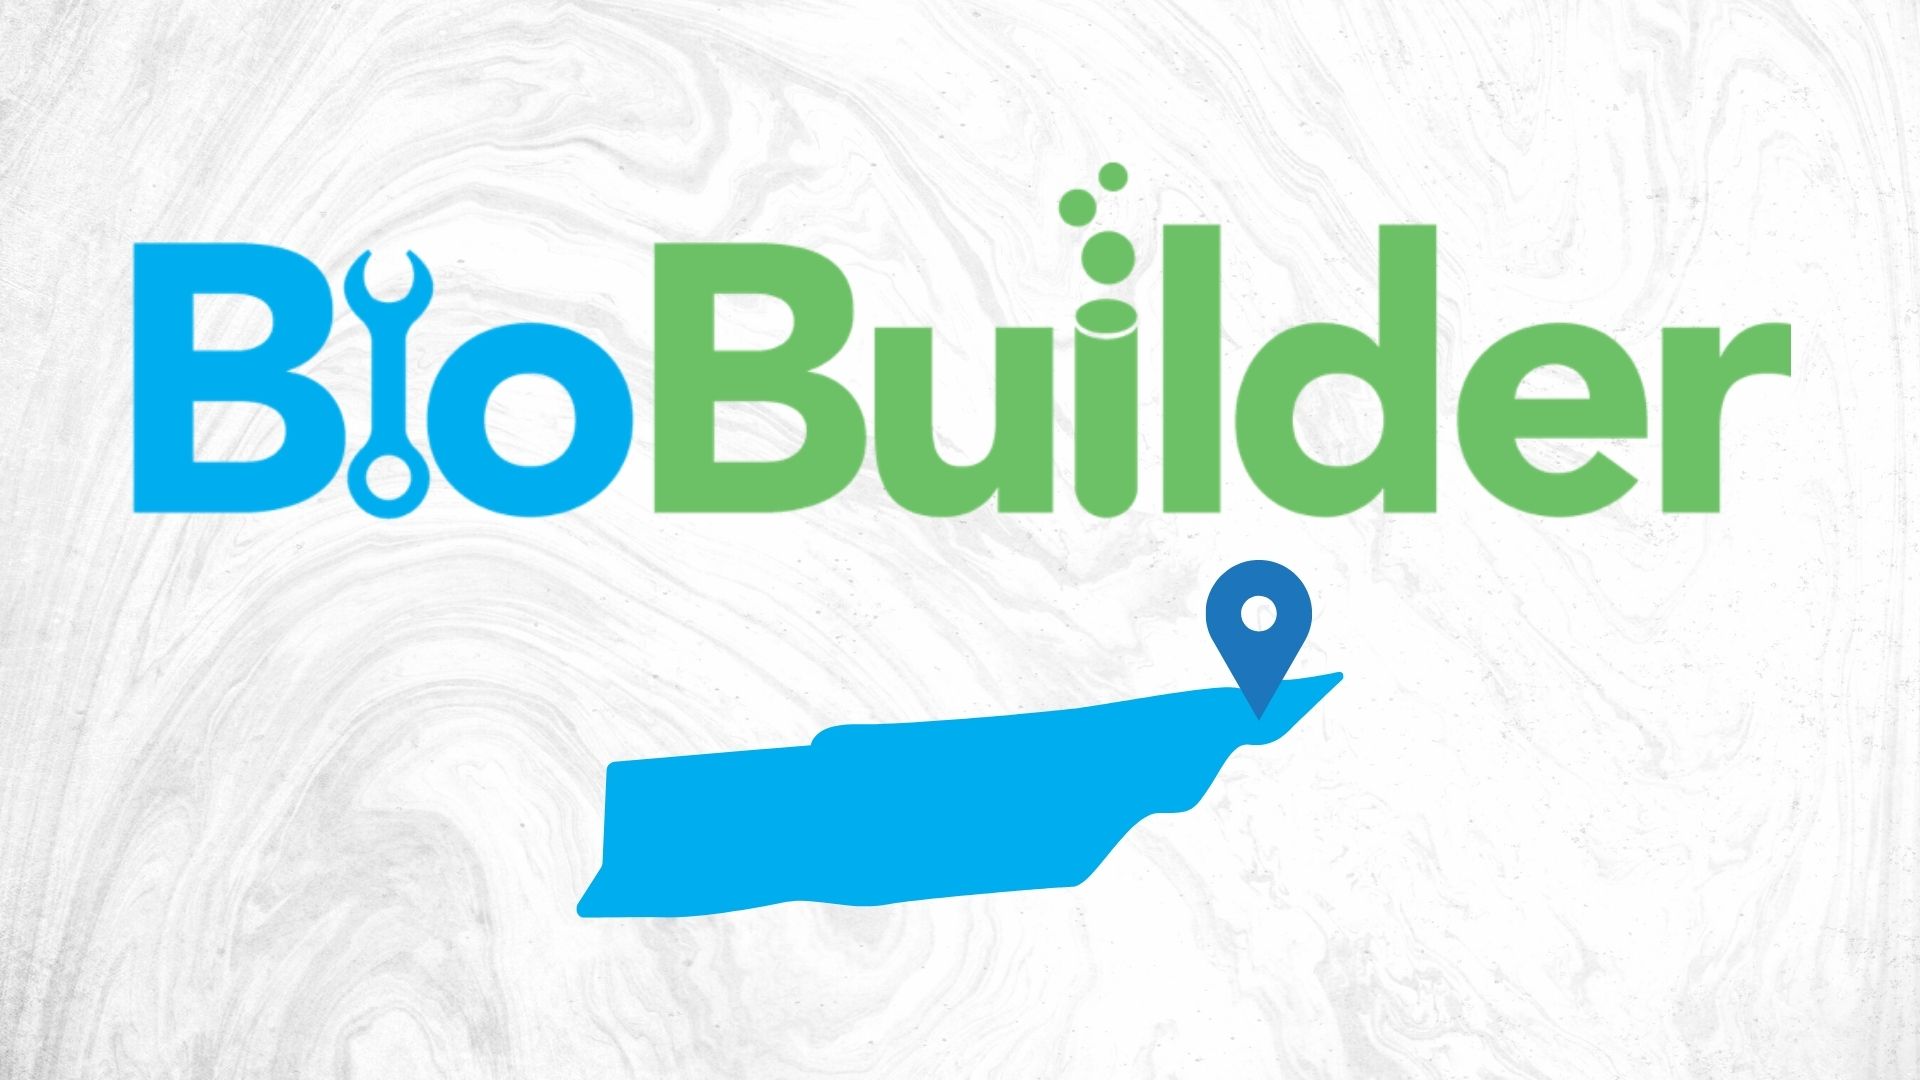 Bio Builder logo with a graphic of Tennesse and a map pinpoint on the northeast region.